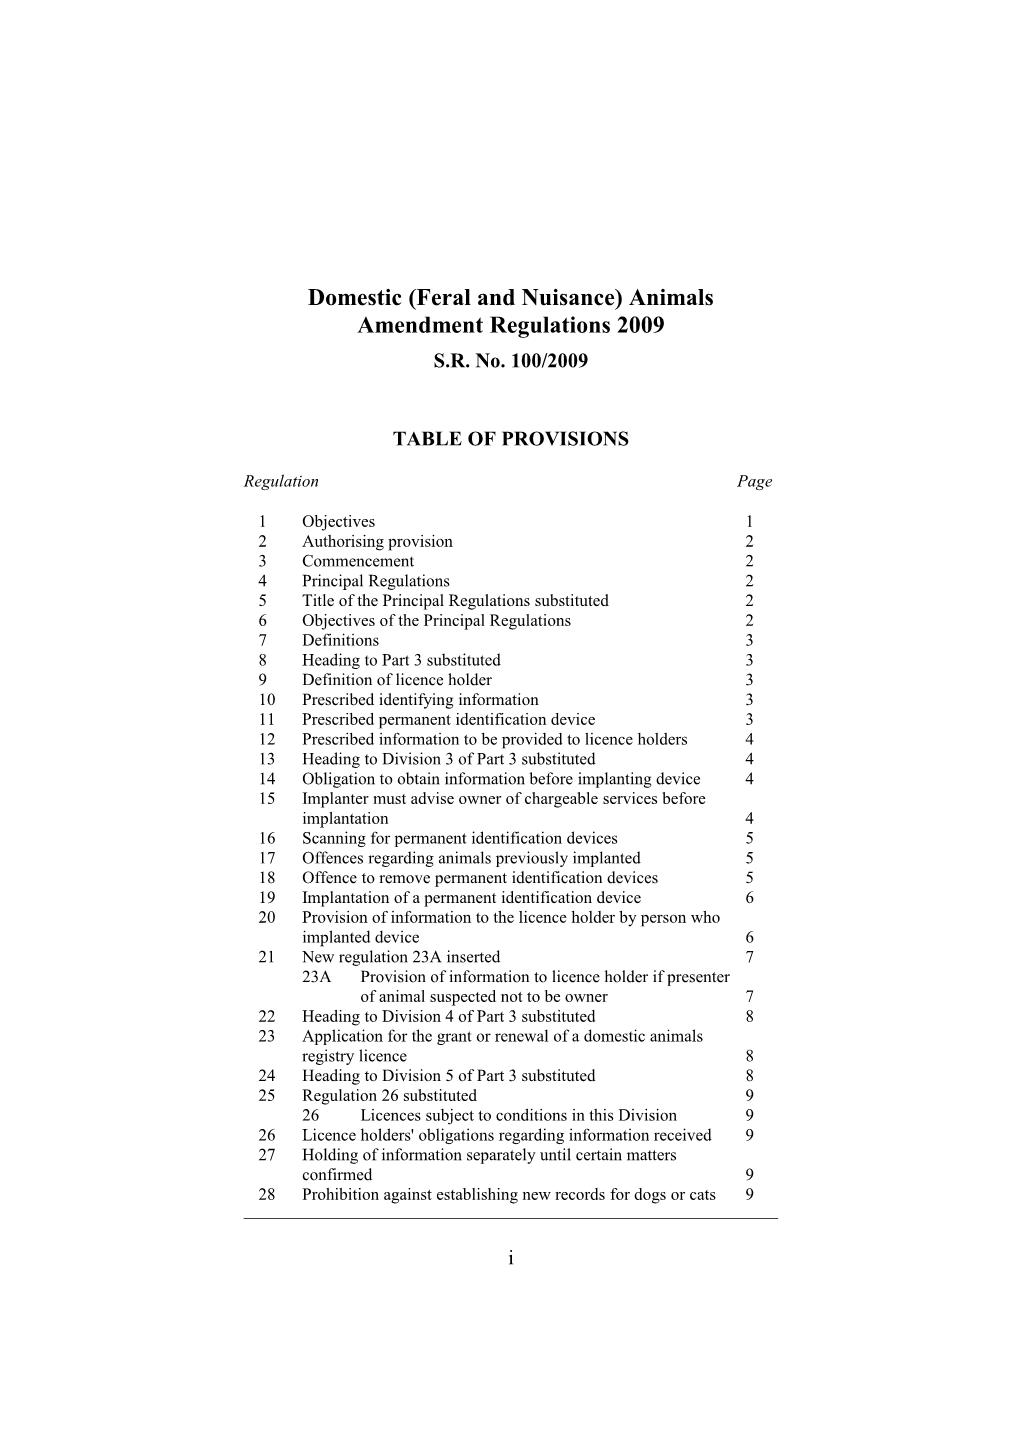 Domestic (Feral and Nuisance) Animals Amendment Regulations 2009